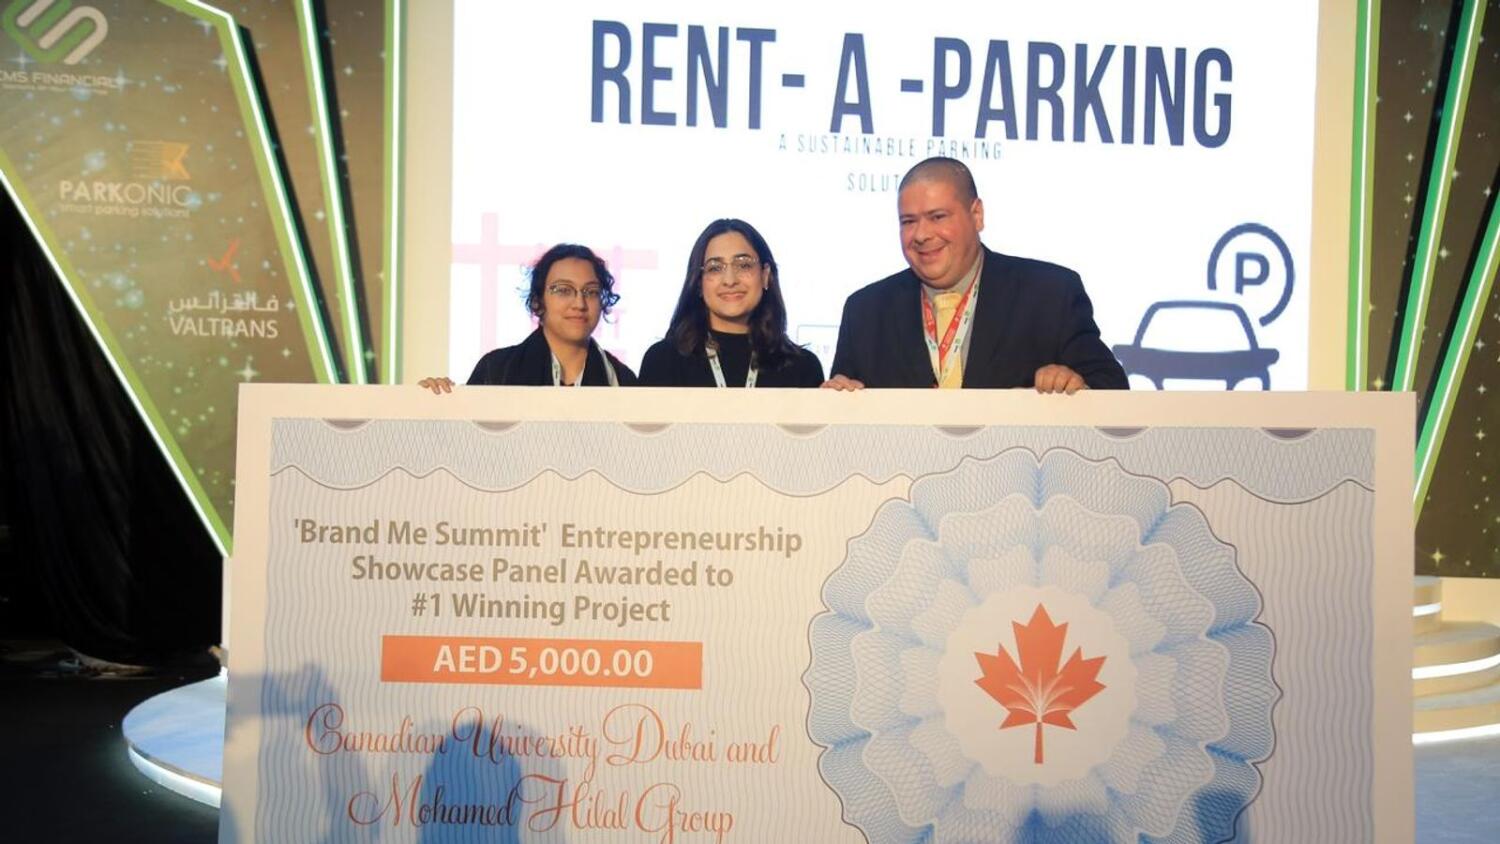 Ramisha and Fatma receive first prize at the Entrepreneurship Showcase for their idea at the Brand Me Summit. — Supplied photo